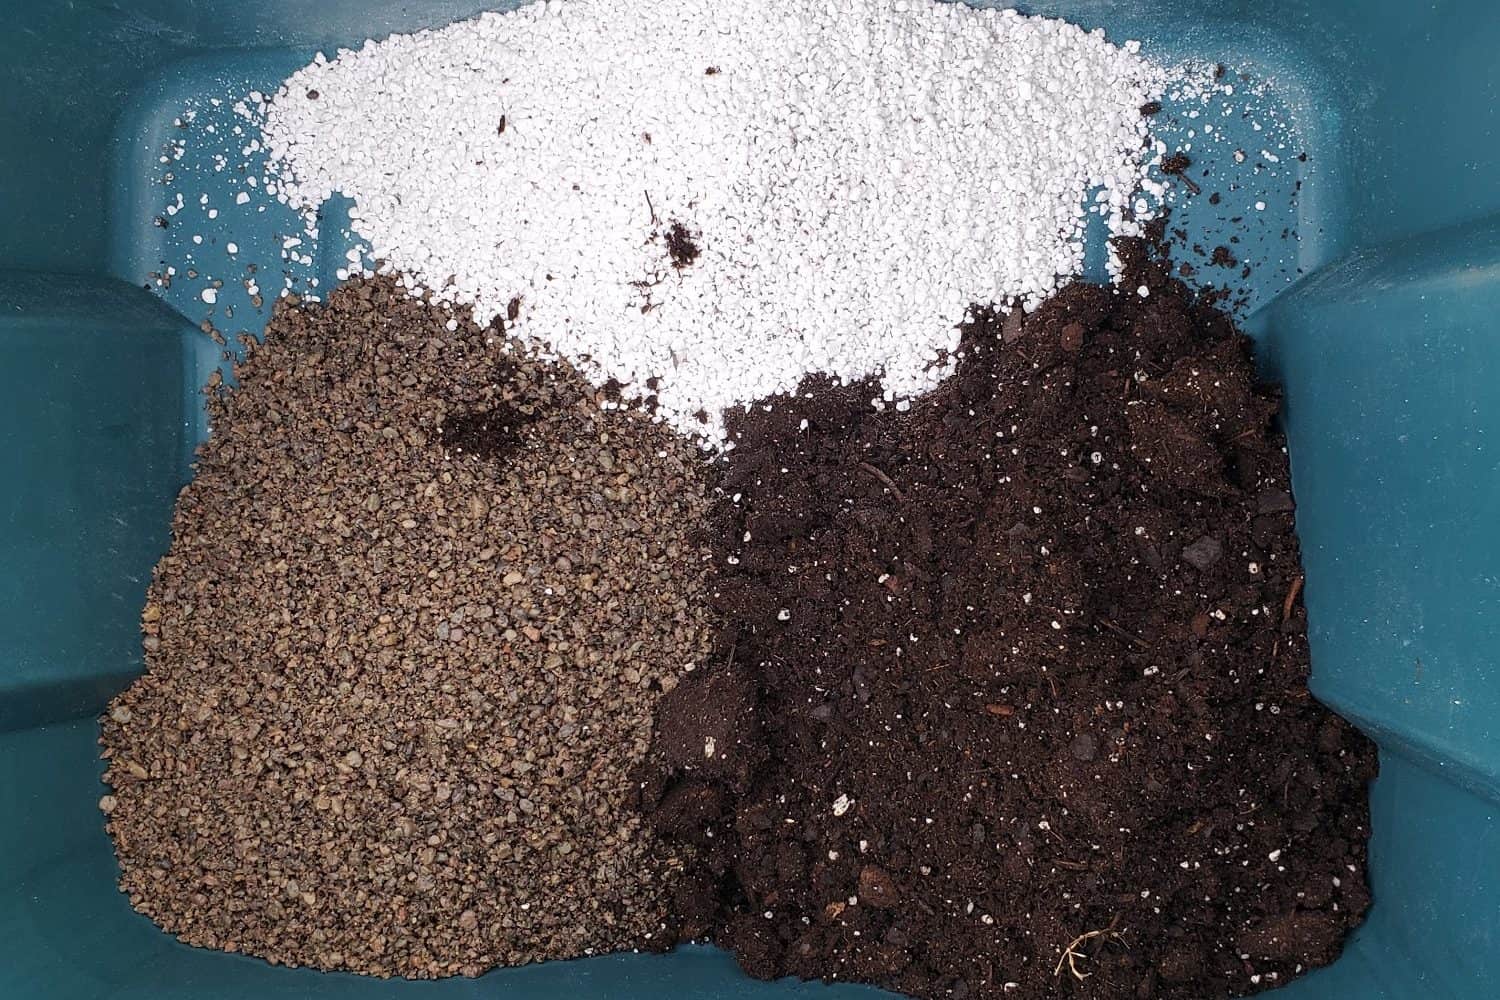 DIY Succulent Potting Soil Mix (With Three Common Ingredients)